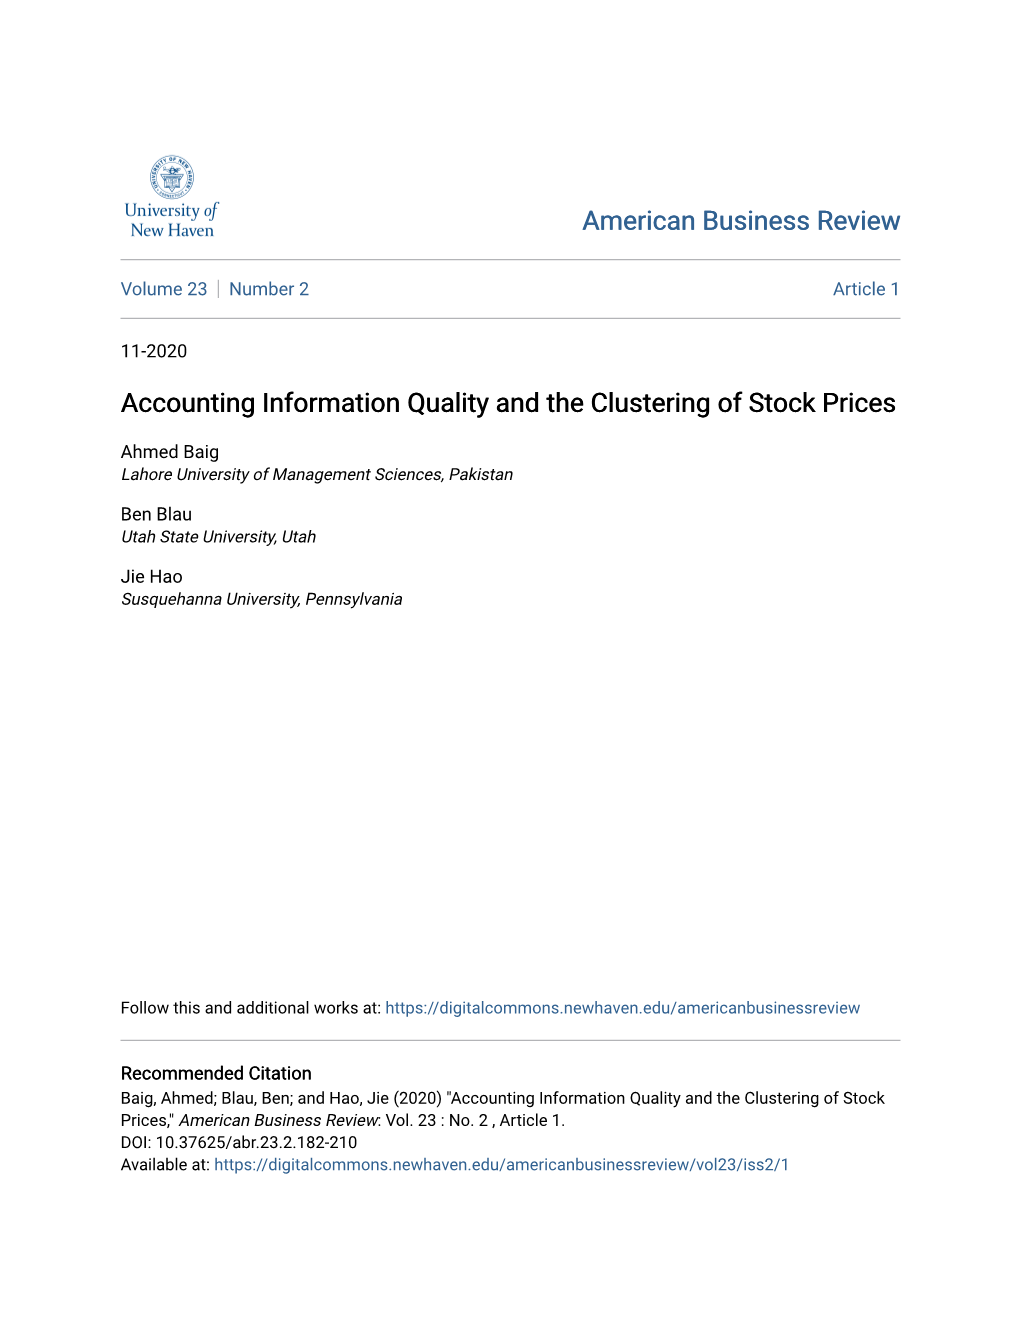 Accounting Information Quality and the Clustering of Stock Prices